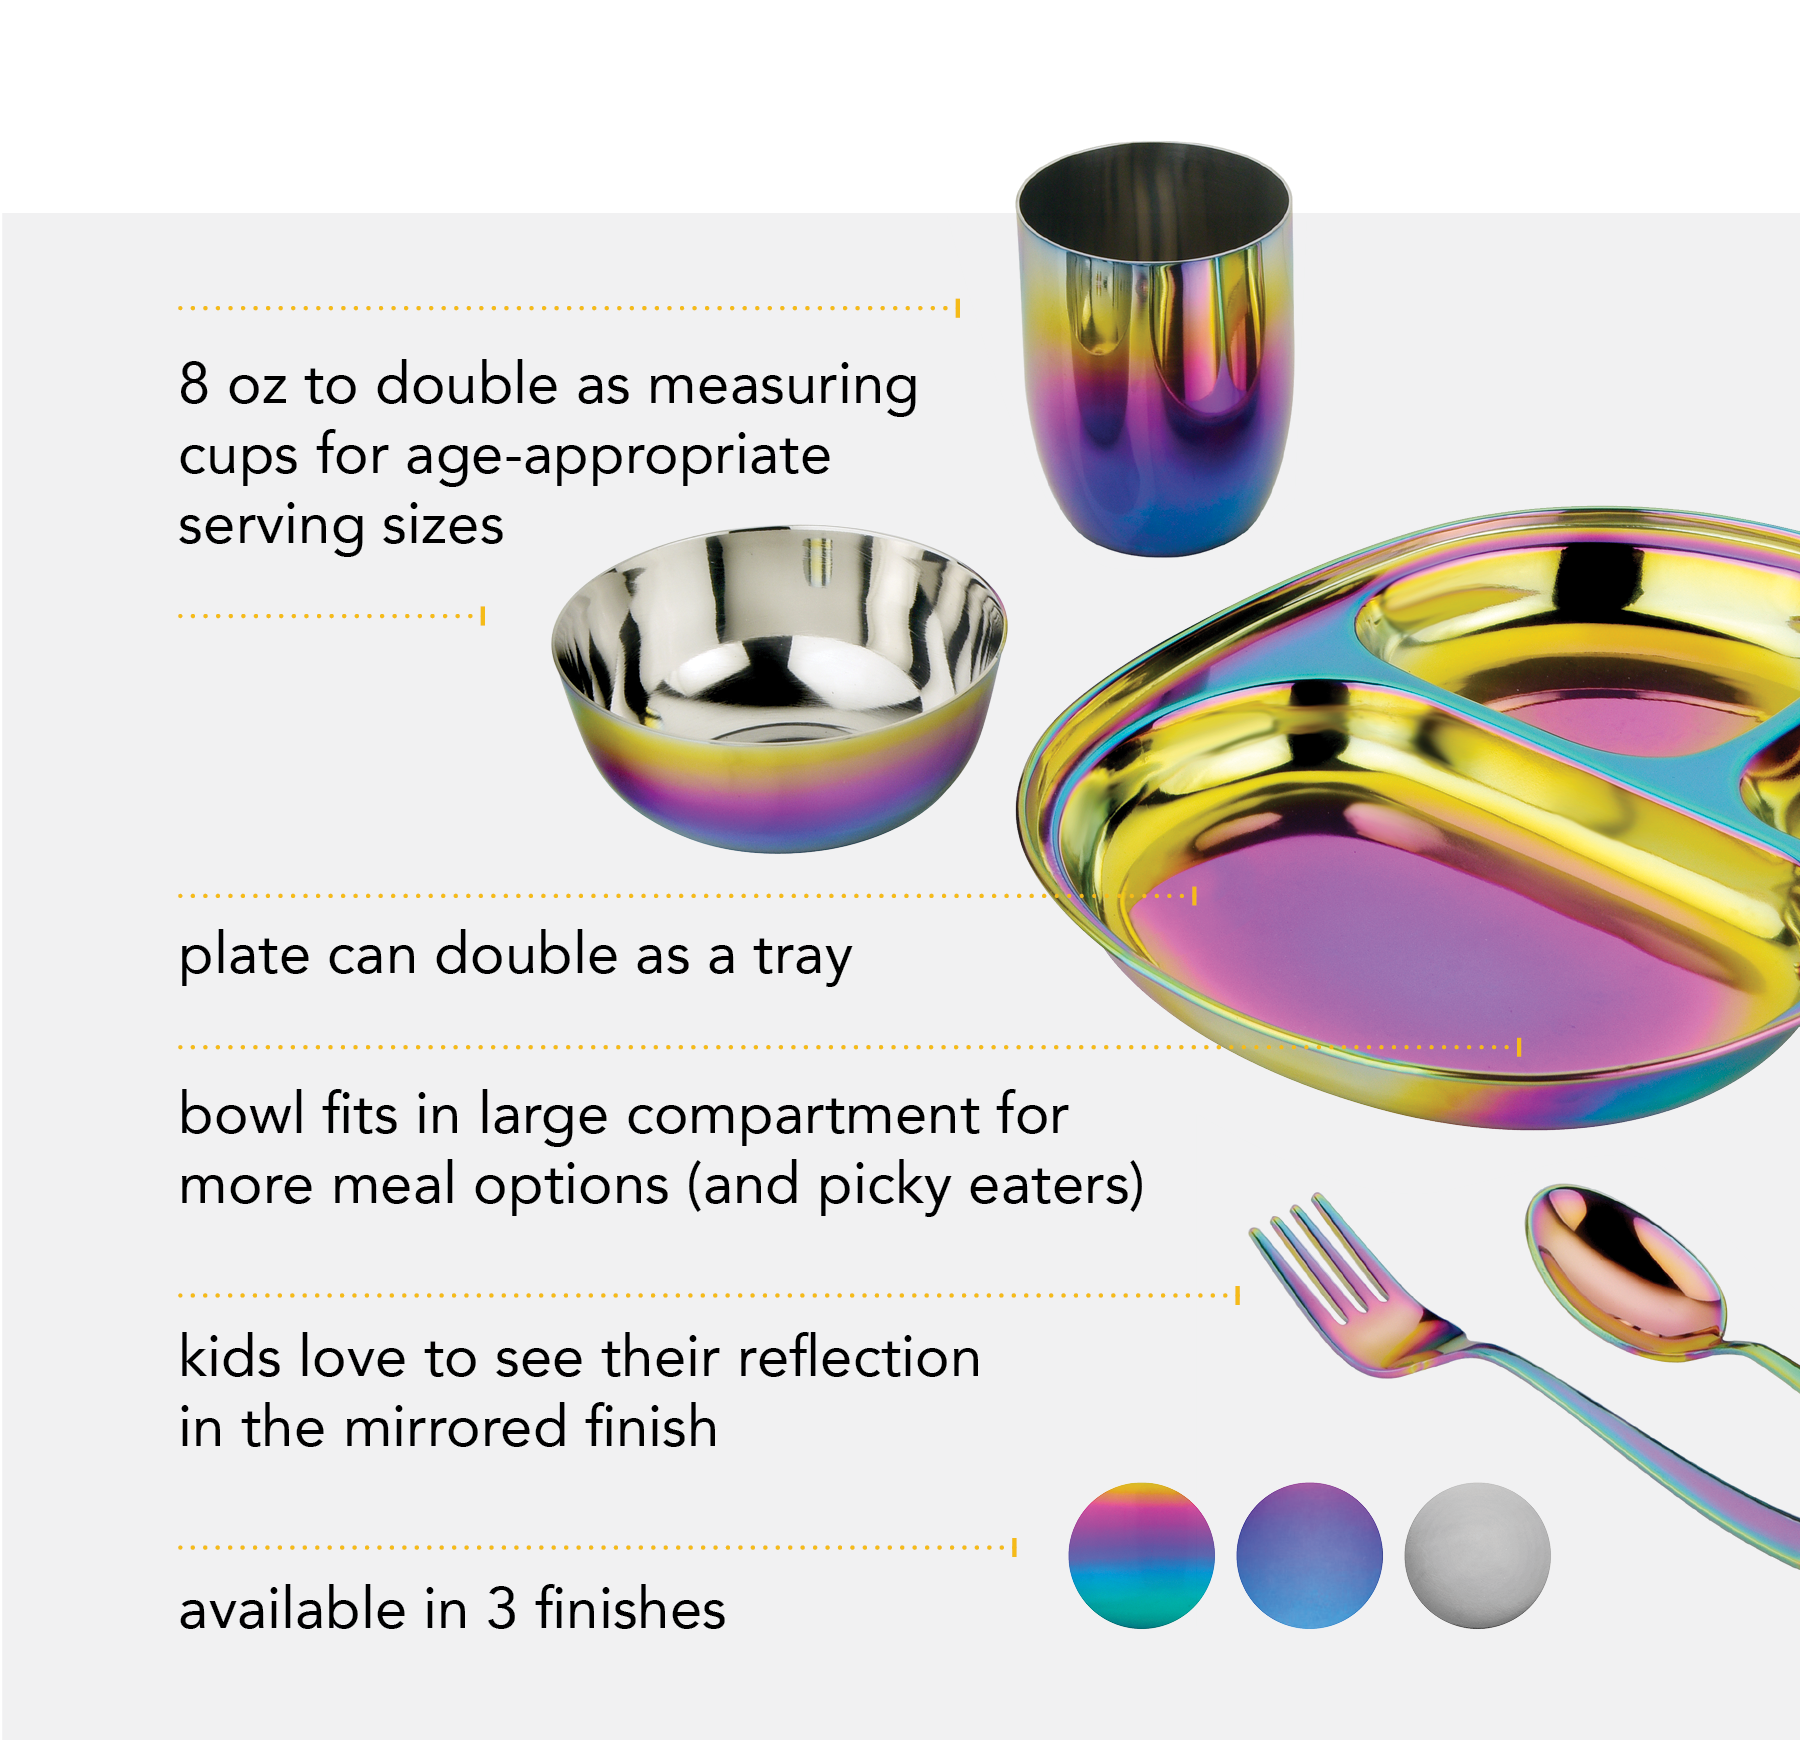 8 oz bowl and cup to double as measuring cups for age-appropriate serving sizes. Kids love to see their mirrored reflection. Plate can double as a tray, perfect for play dates. bowl fits in large compartment for more meal options. 